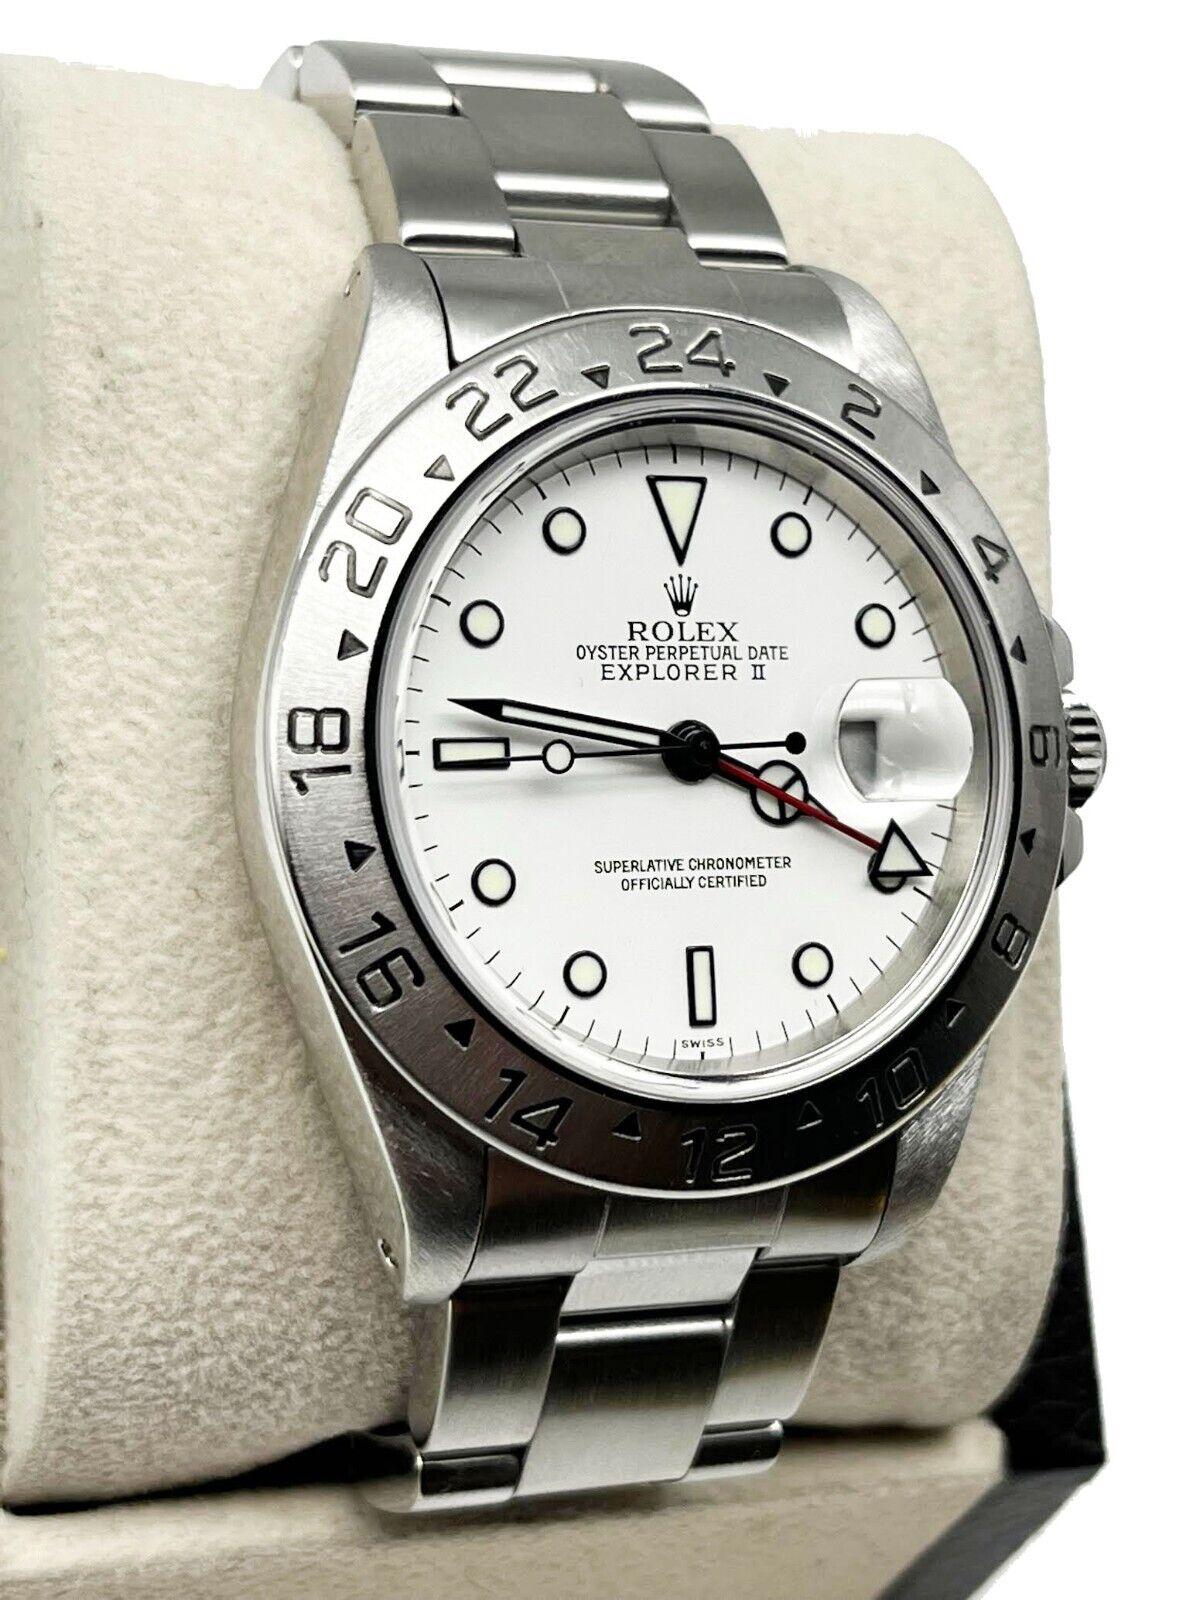 Style Number: 16750

Serial: A461***

Year: 1999

Model: Explorer II

Case Material: Stainless Steel 

Band: Stainless Steel 

Bezel: Stainless Steel 

Dial: White

Face: Sapphire Crystal 

Case Size: 40mm  

Includes: 

-Elegant Watch